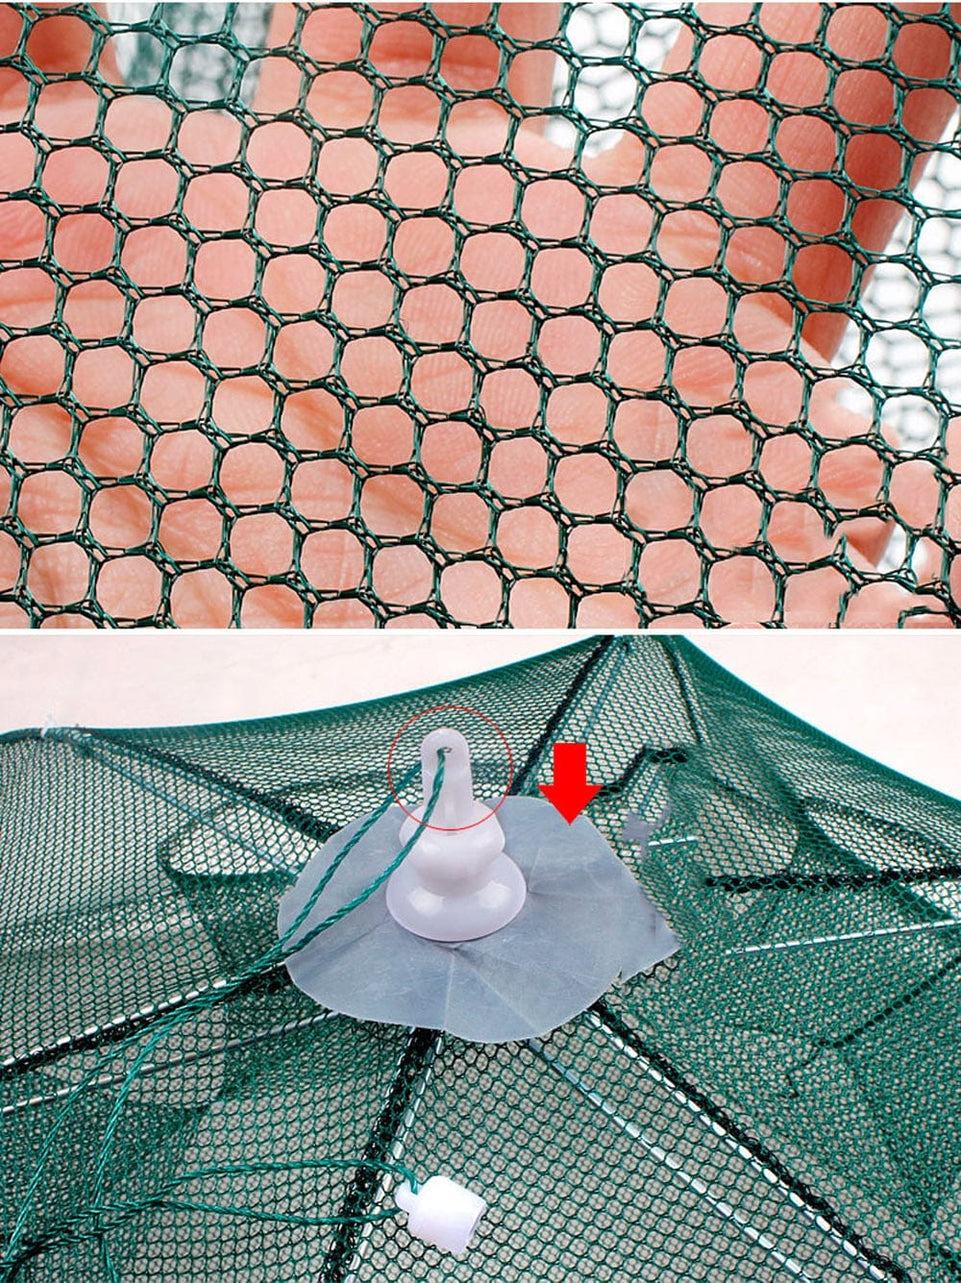 4-20 Hole Umbrella Fishing Net Fish Umbrella Cage Automatic Folding Fish Net Hand Throw Net Fishing Cage Cover Cage Shrimp Cages